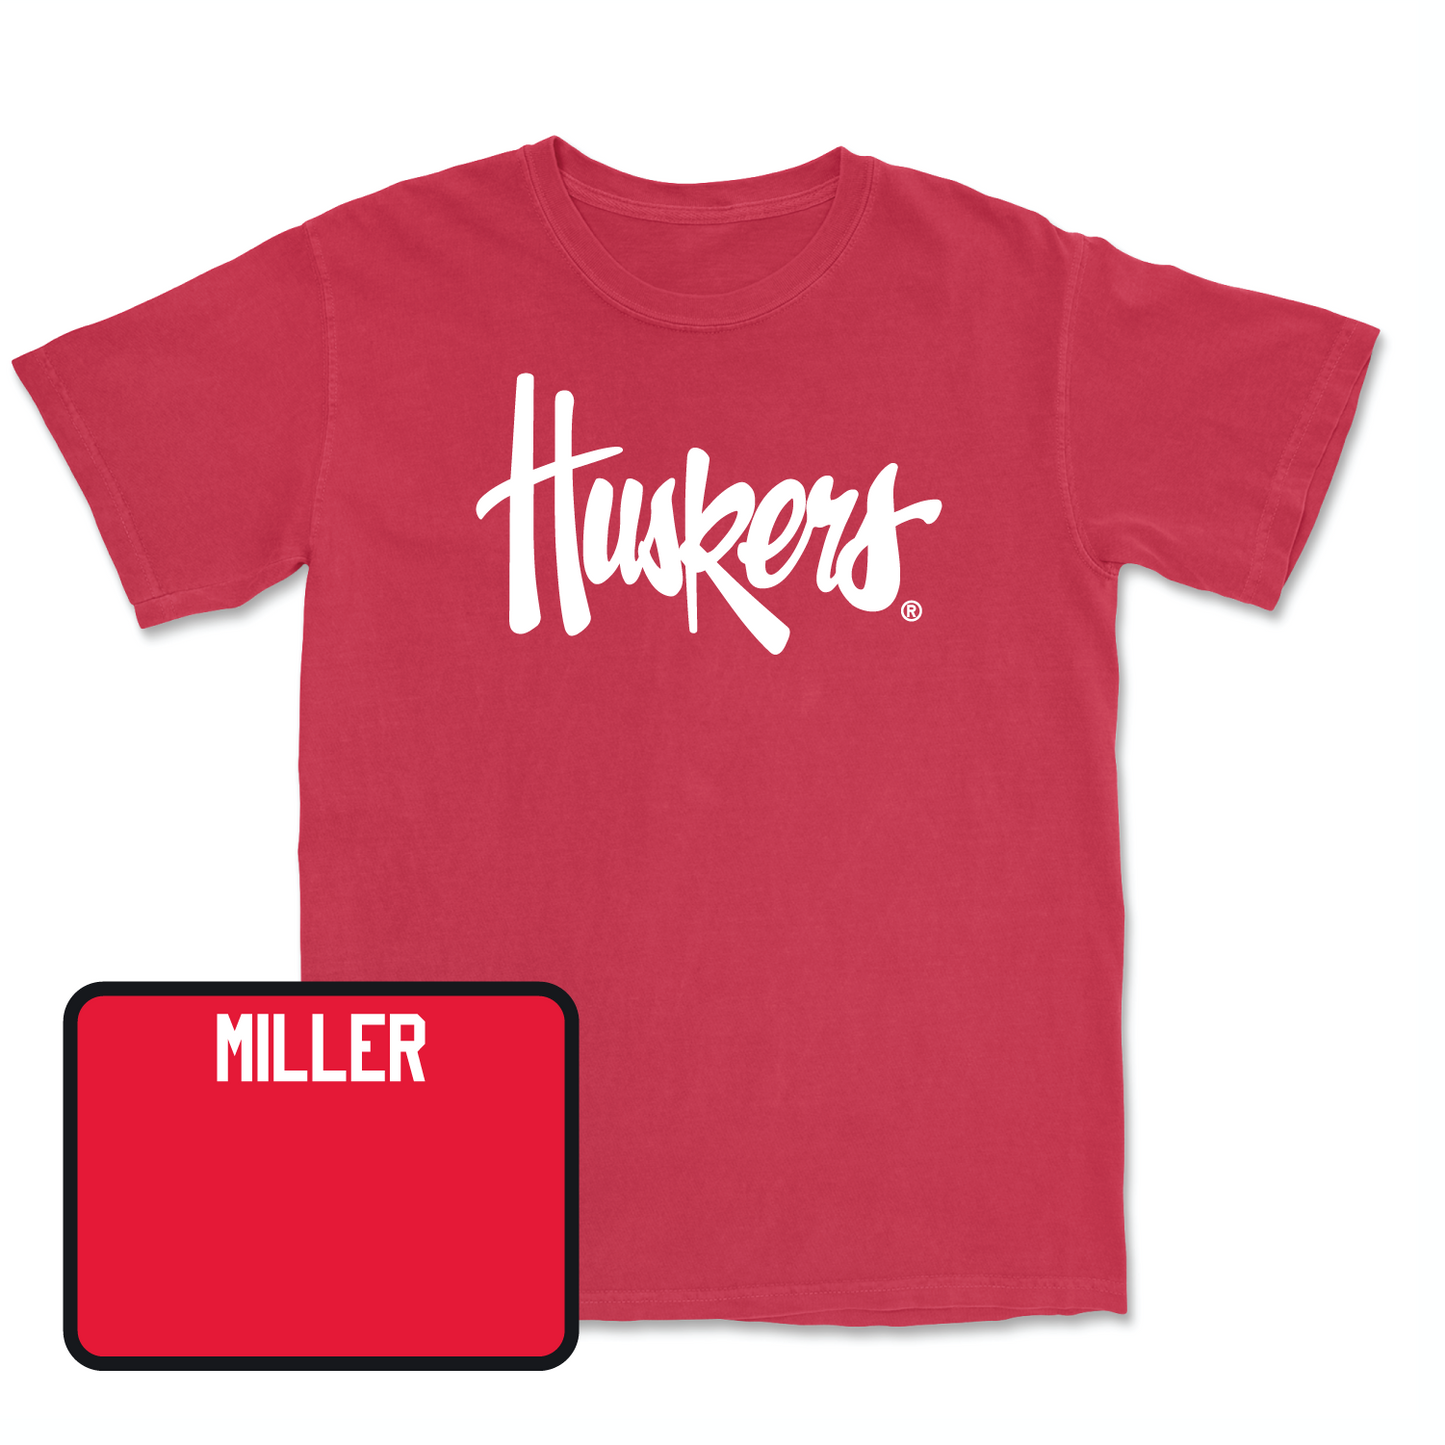 Red Track & Field Huskers Tee X-Large / Brooklyn Miller